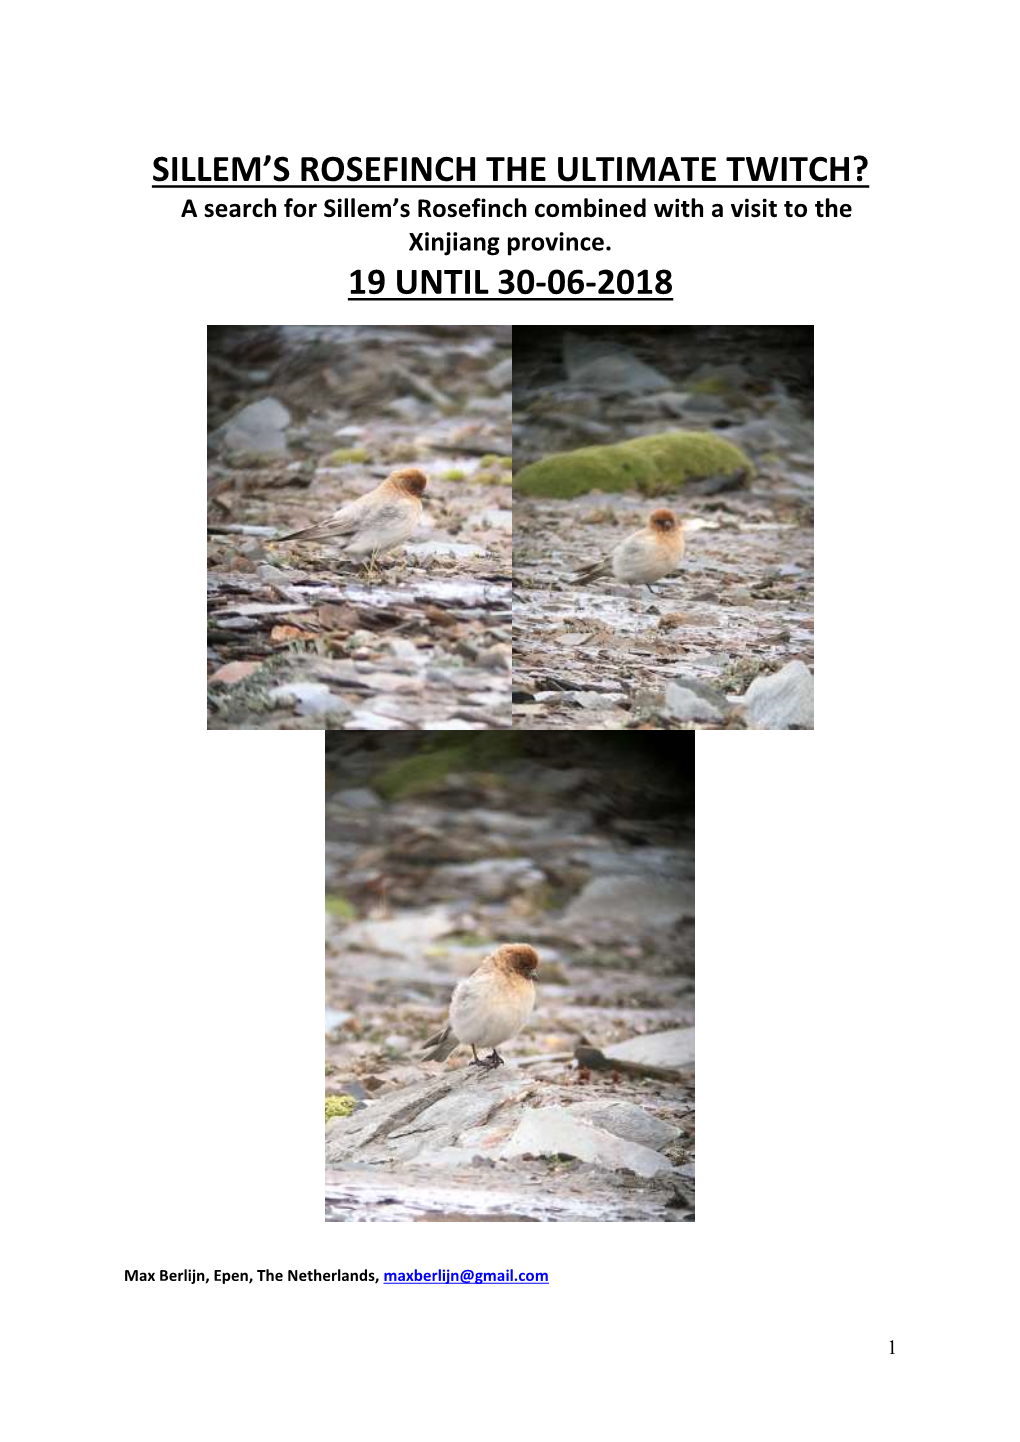 Sillem's Rosefinch the Ultimate Twitch? 19 Until 30-06-2018